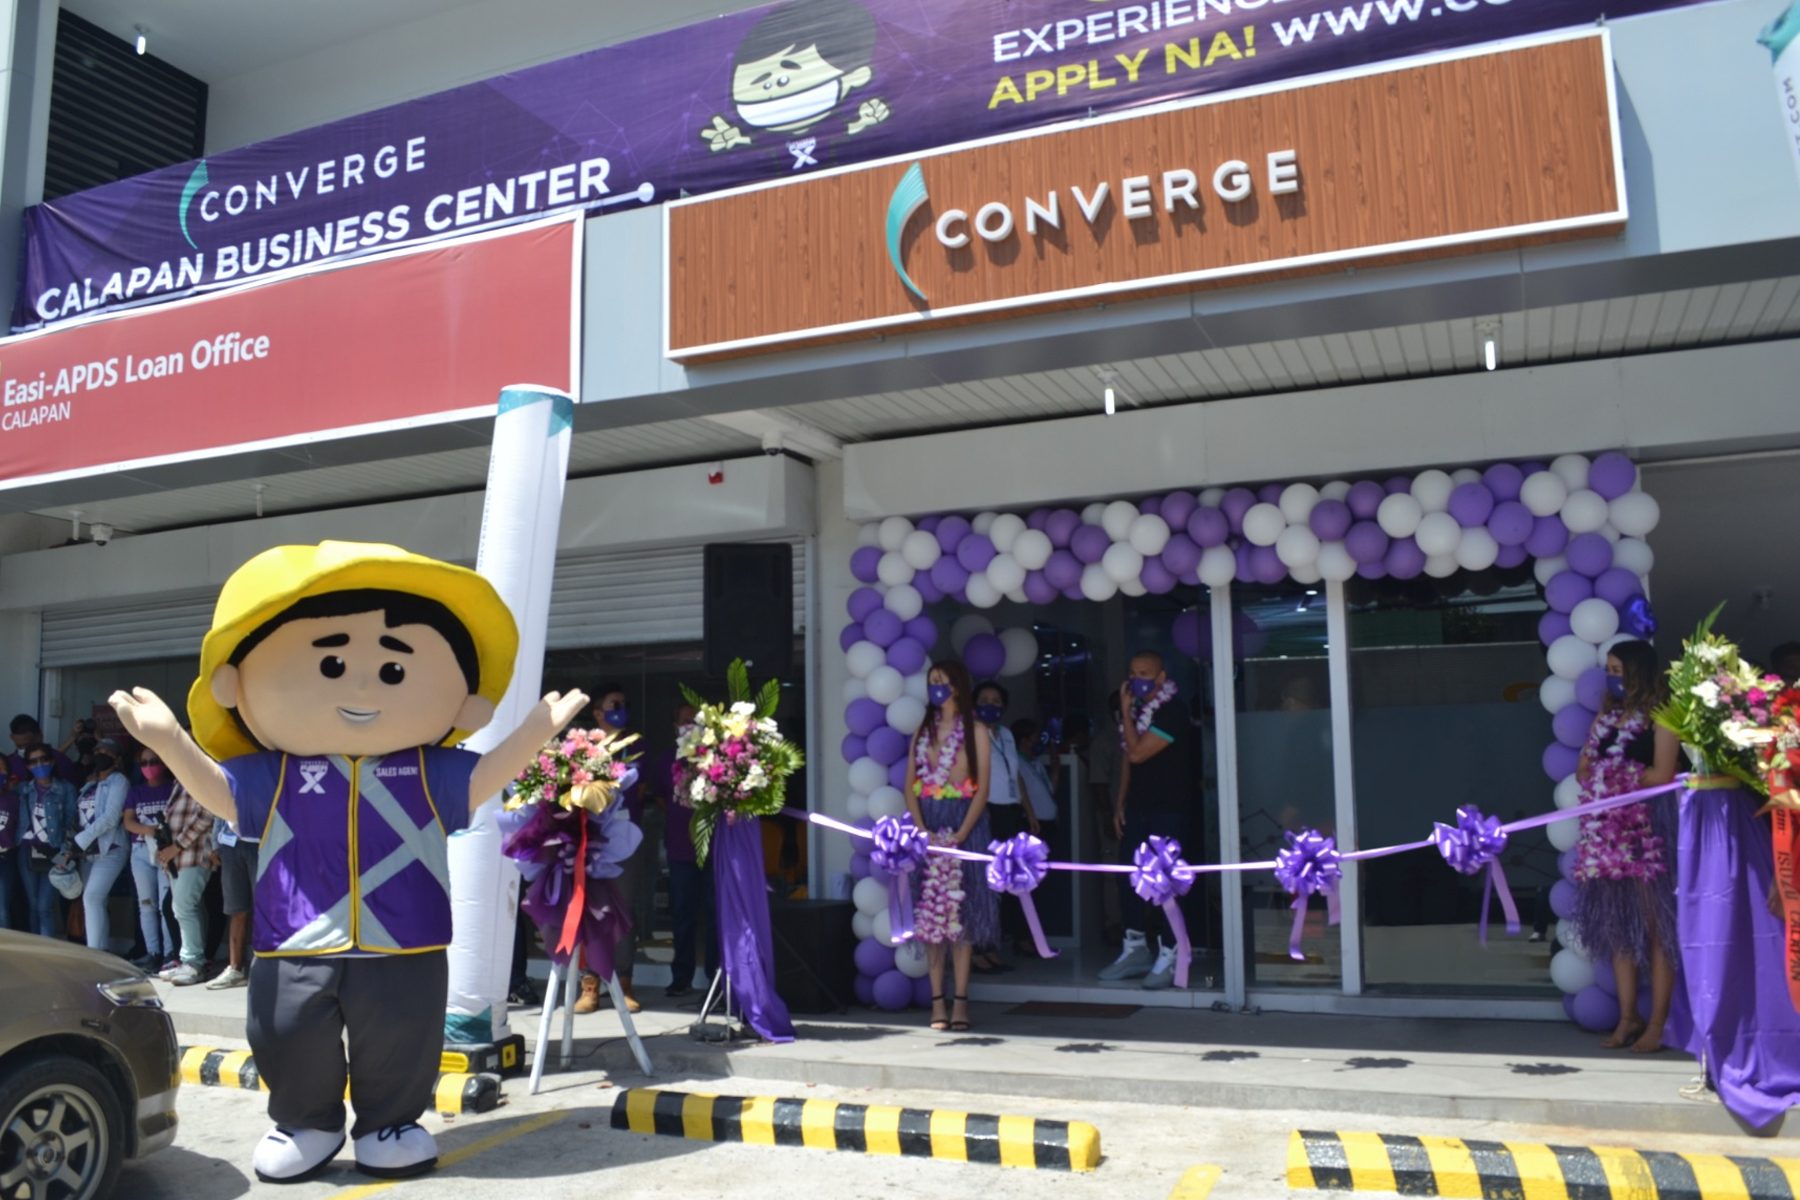 Converge profits up 27% to almost P2 billion in Q1 2022